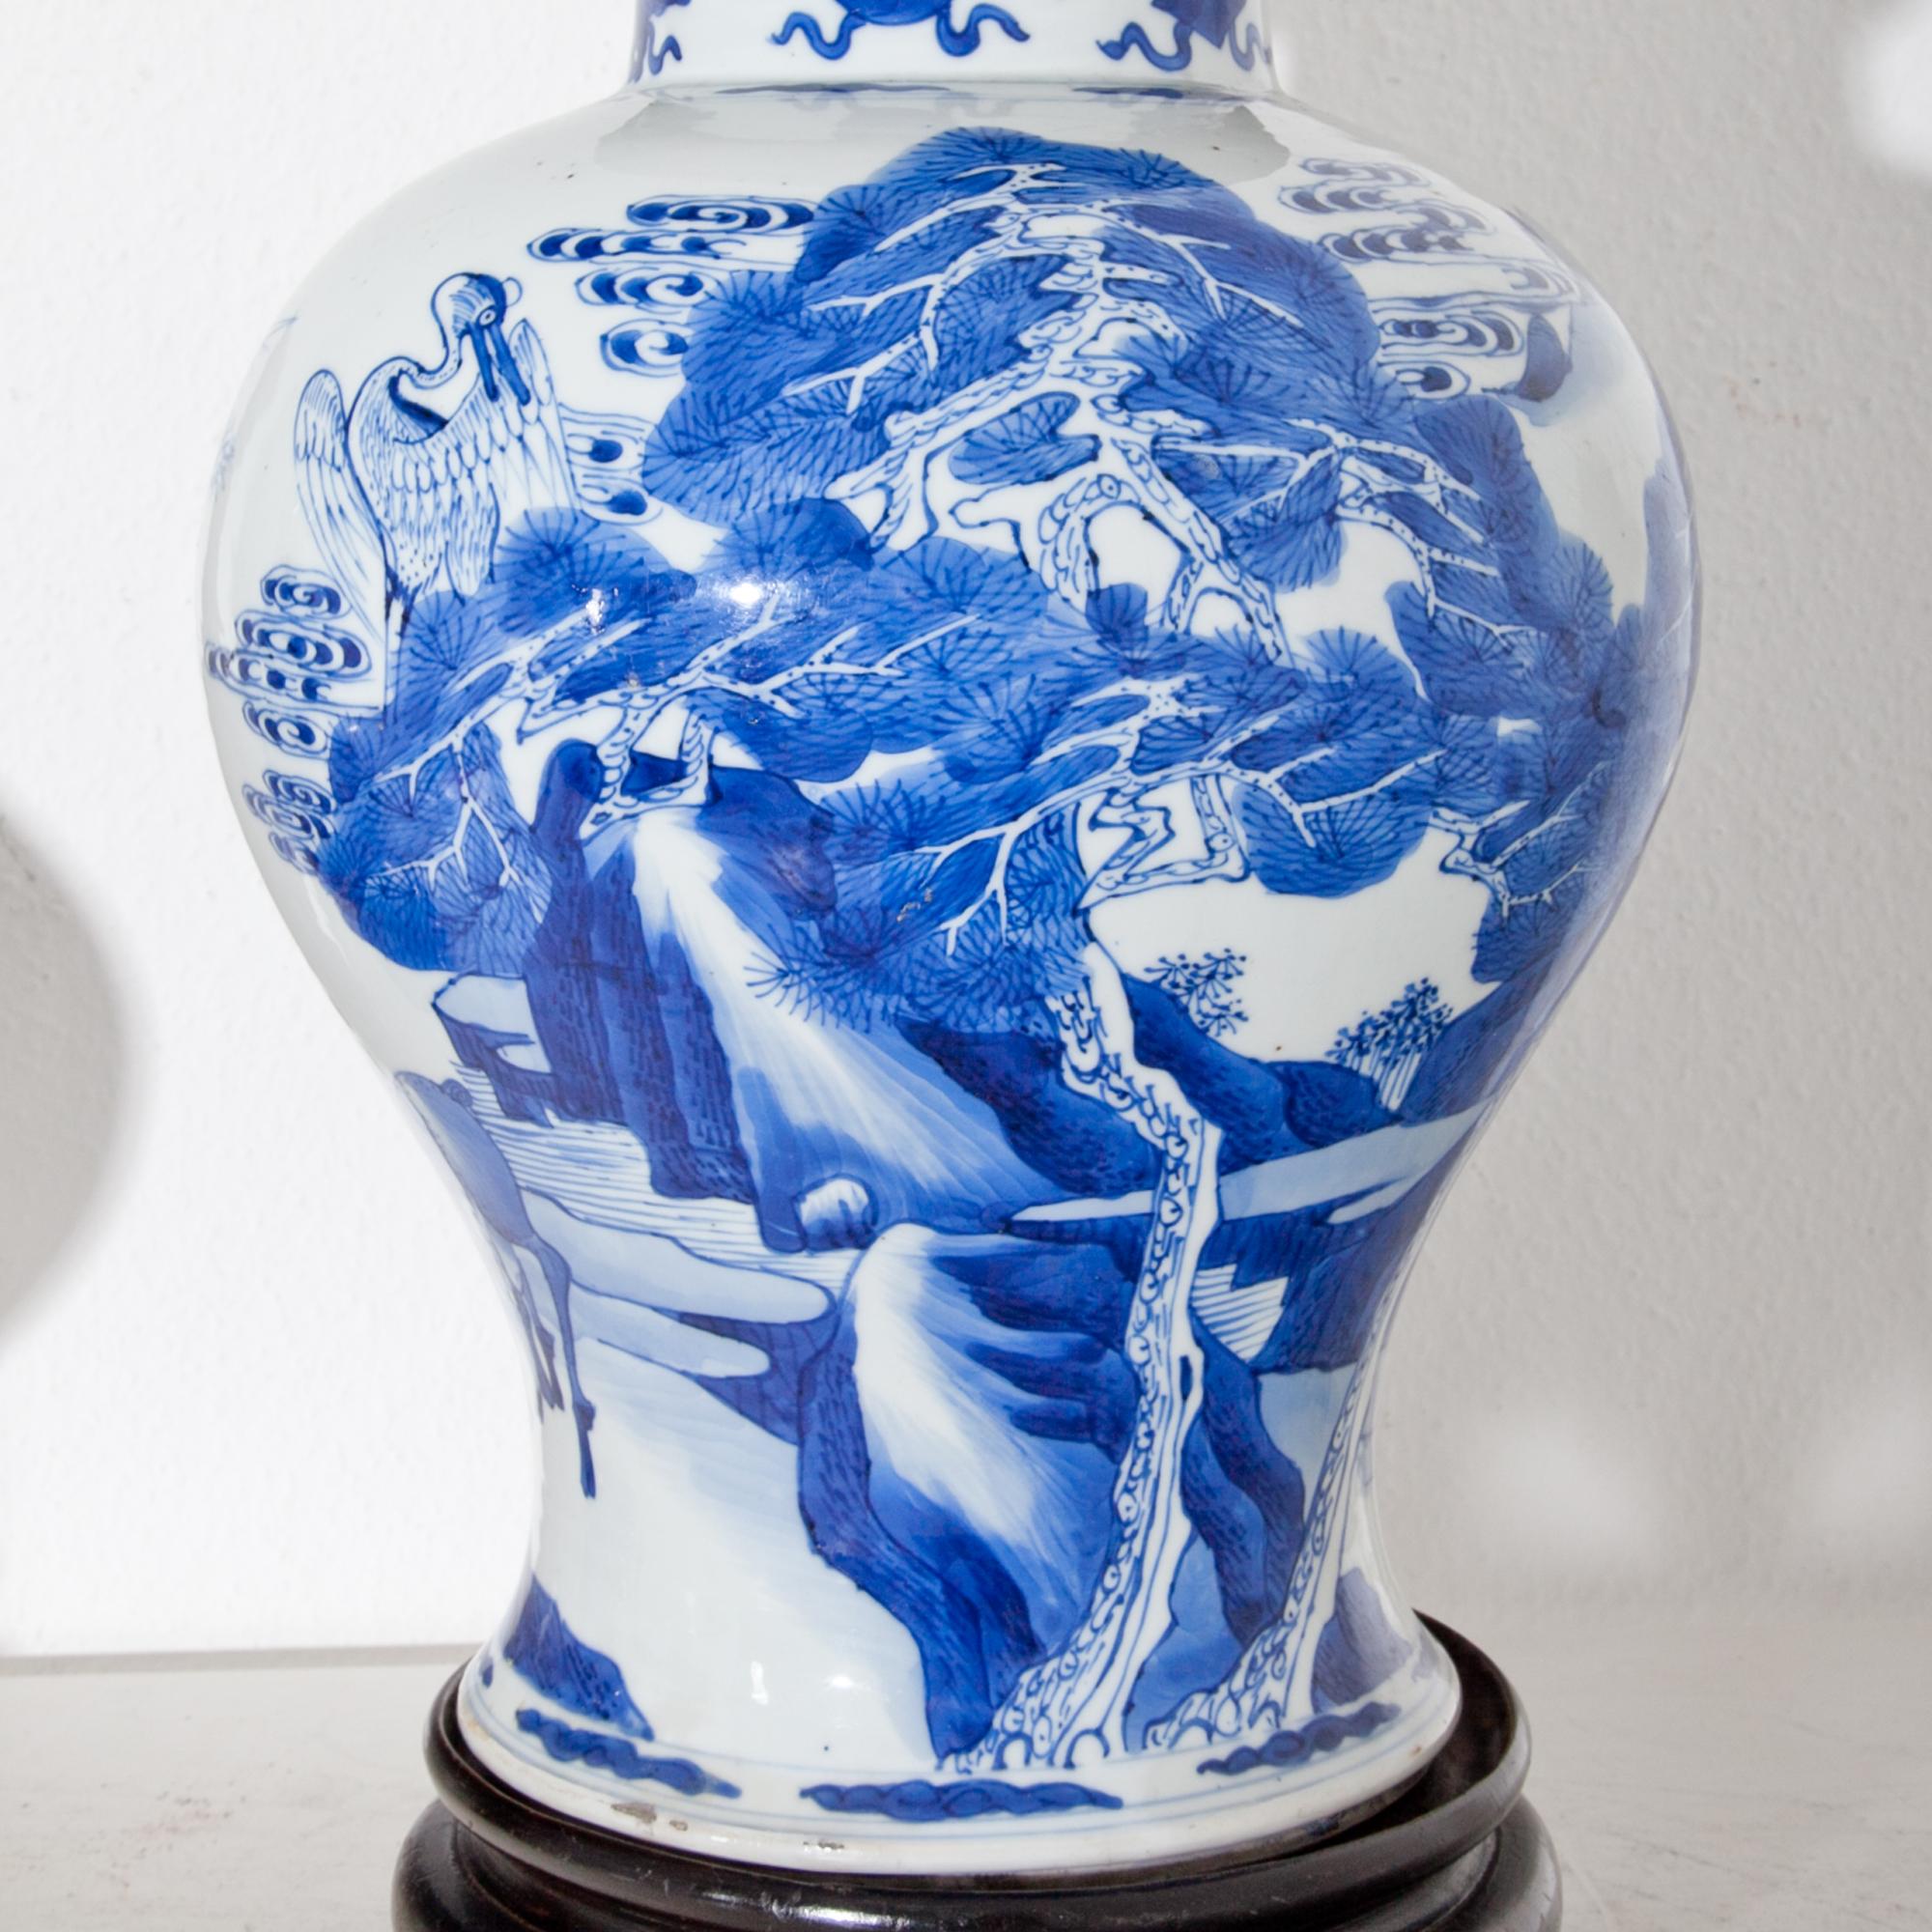 Porcelain vase standing on a round wooden base with openwork wooden lid of the Kang'Hsi period. The bulbous wall with underglaze blue landscape painting with storks and deer. At the upper rim depiction of the treasures, such as the Artemis-leaf and